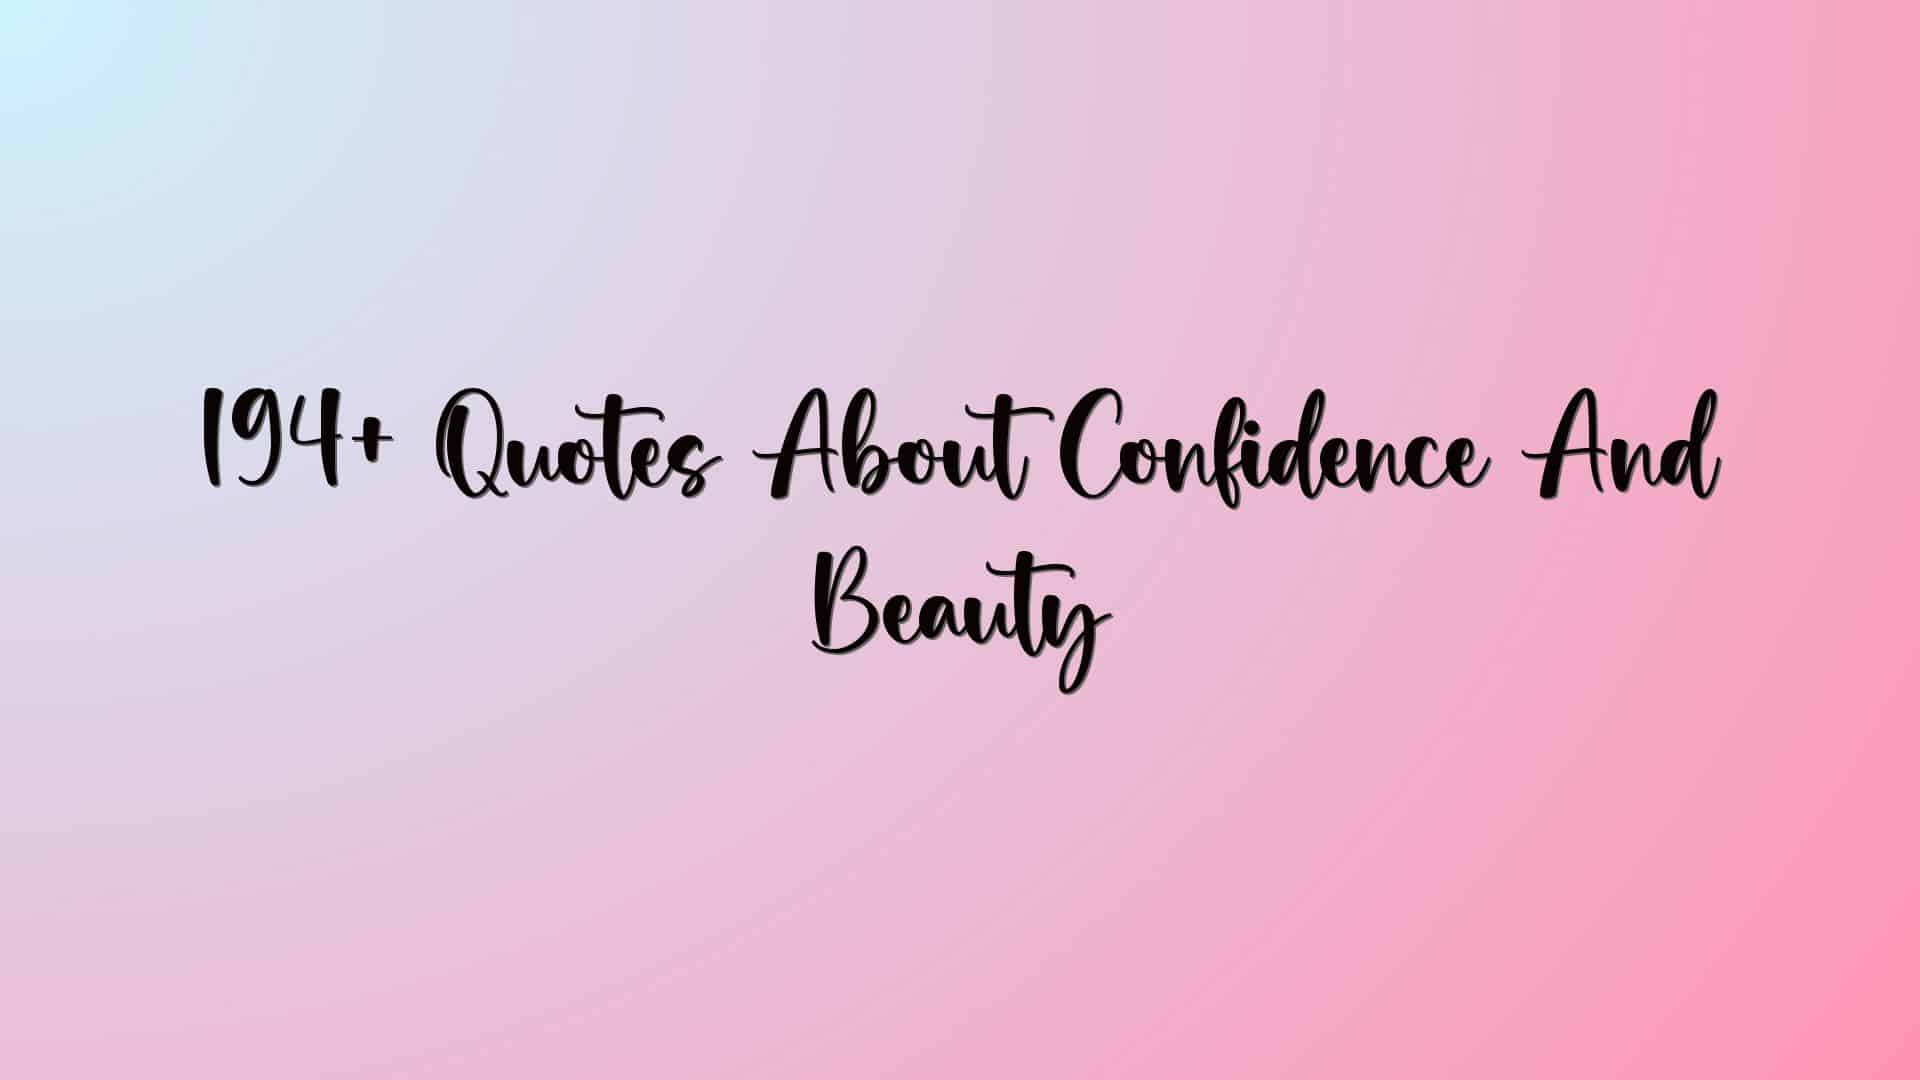 194+ Quotes About Confidence And Beauty